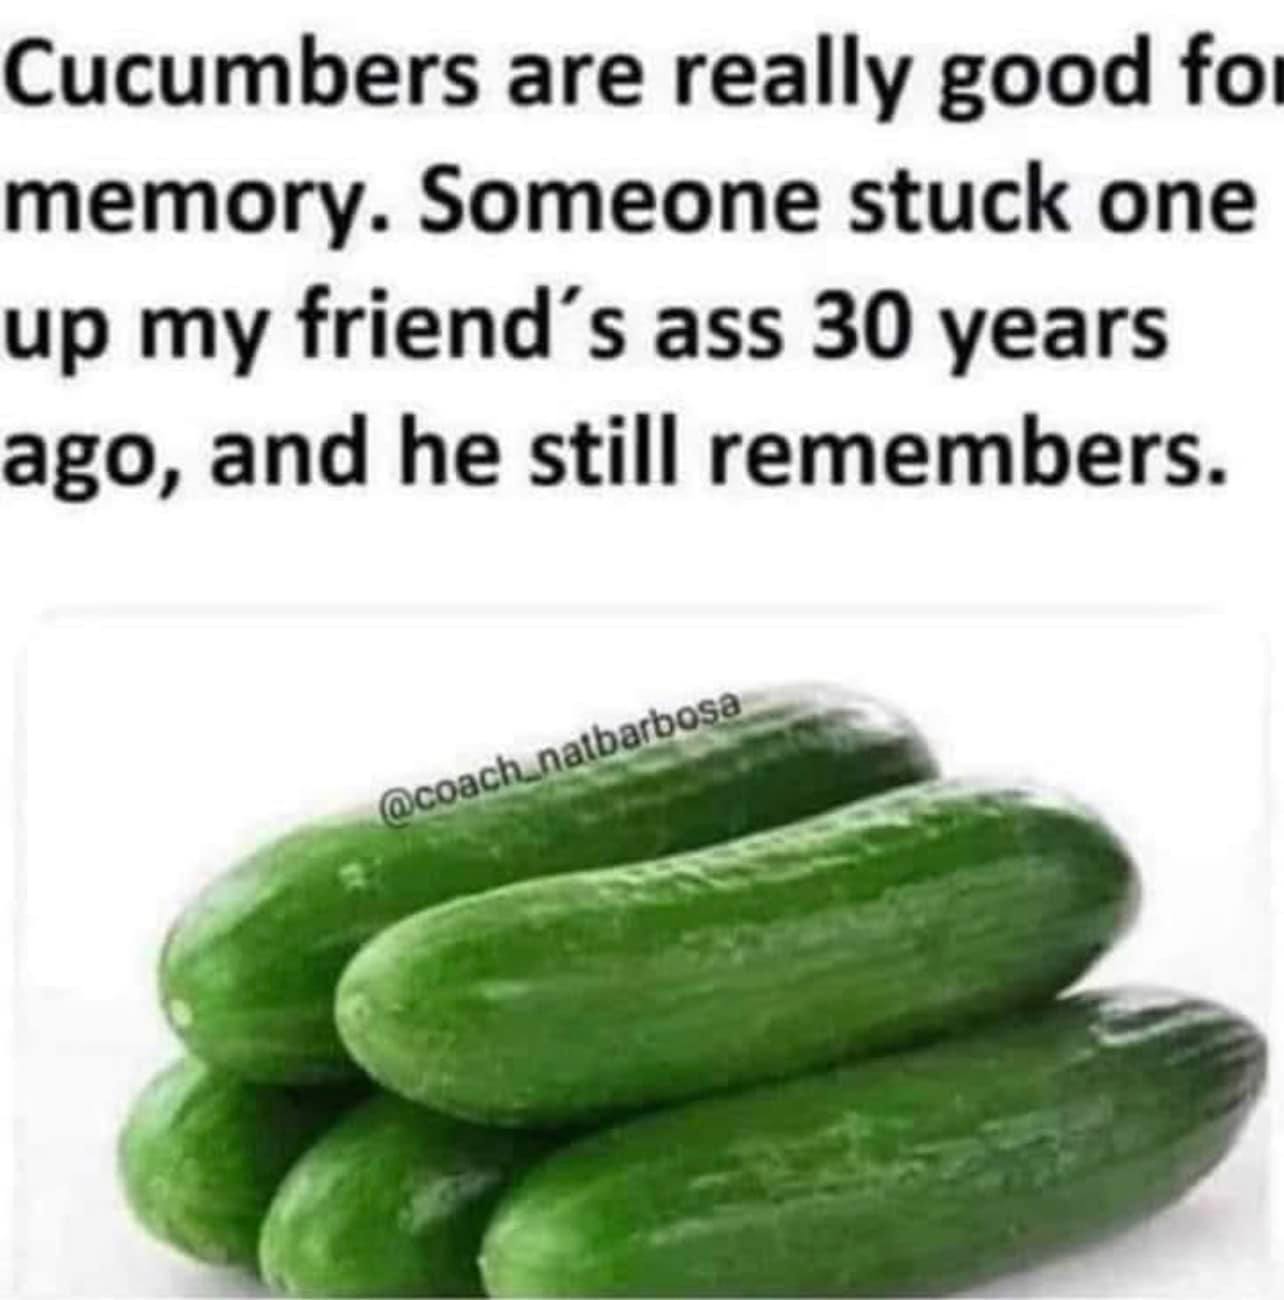 Cucumbers are really good for memory. Someone stuck one up my friend's ass 30 years ago, and he still remembers.